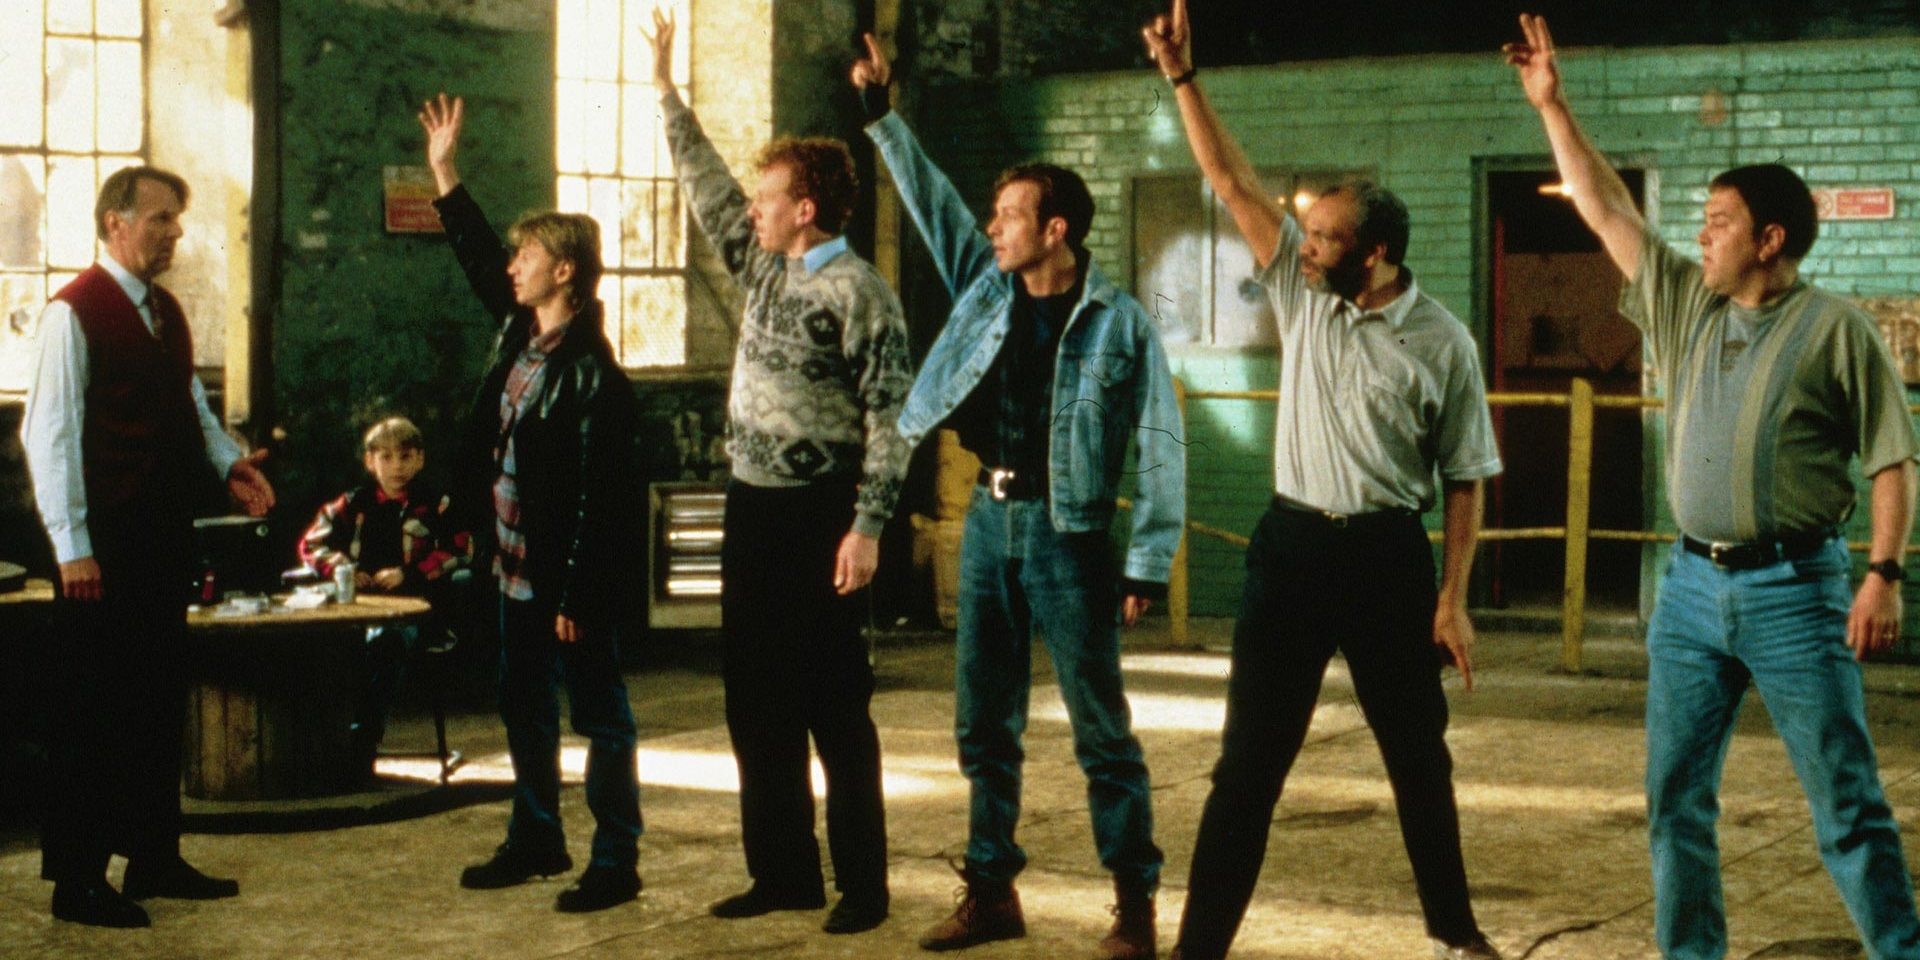 A dance rehearsal in The Full Monty movie